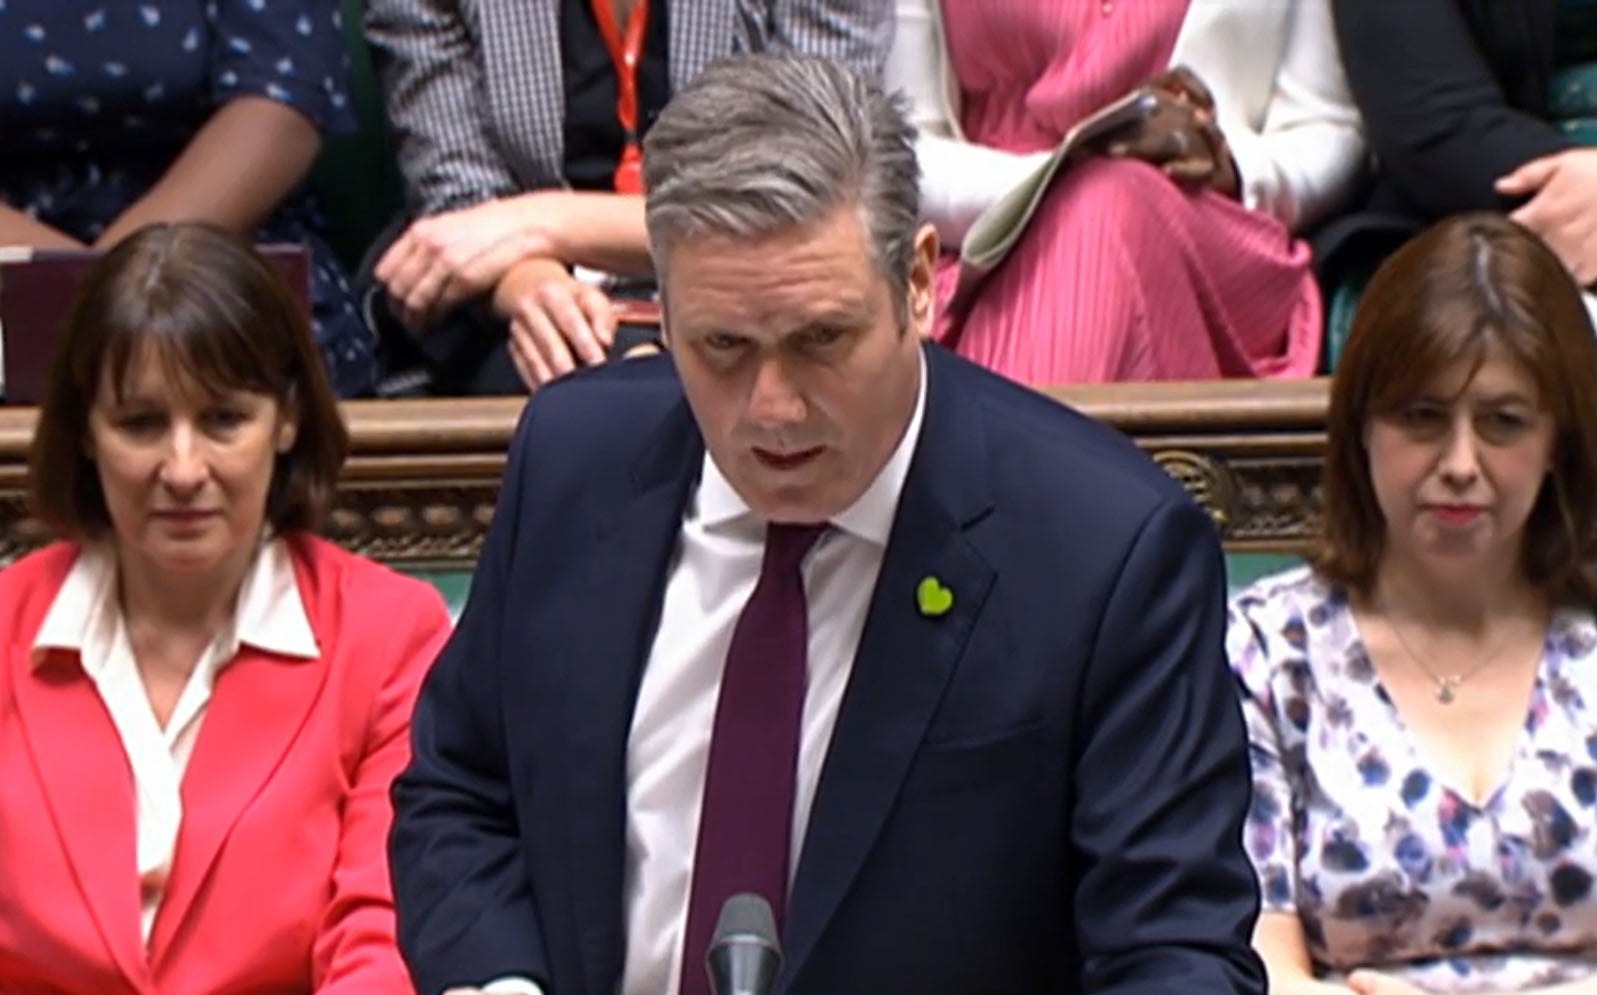 Keir Starmer said Sunak had a keen interest in the mortgage market in California, and that he was too removed in his helicopter from the lived experience of those on the ground